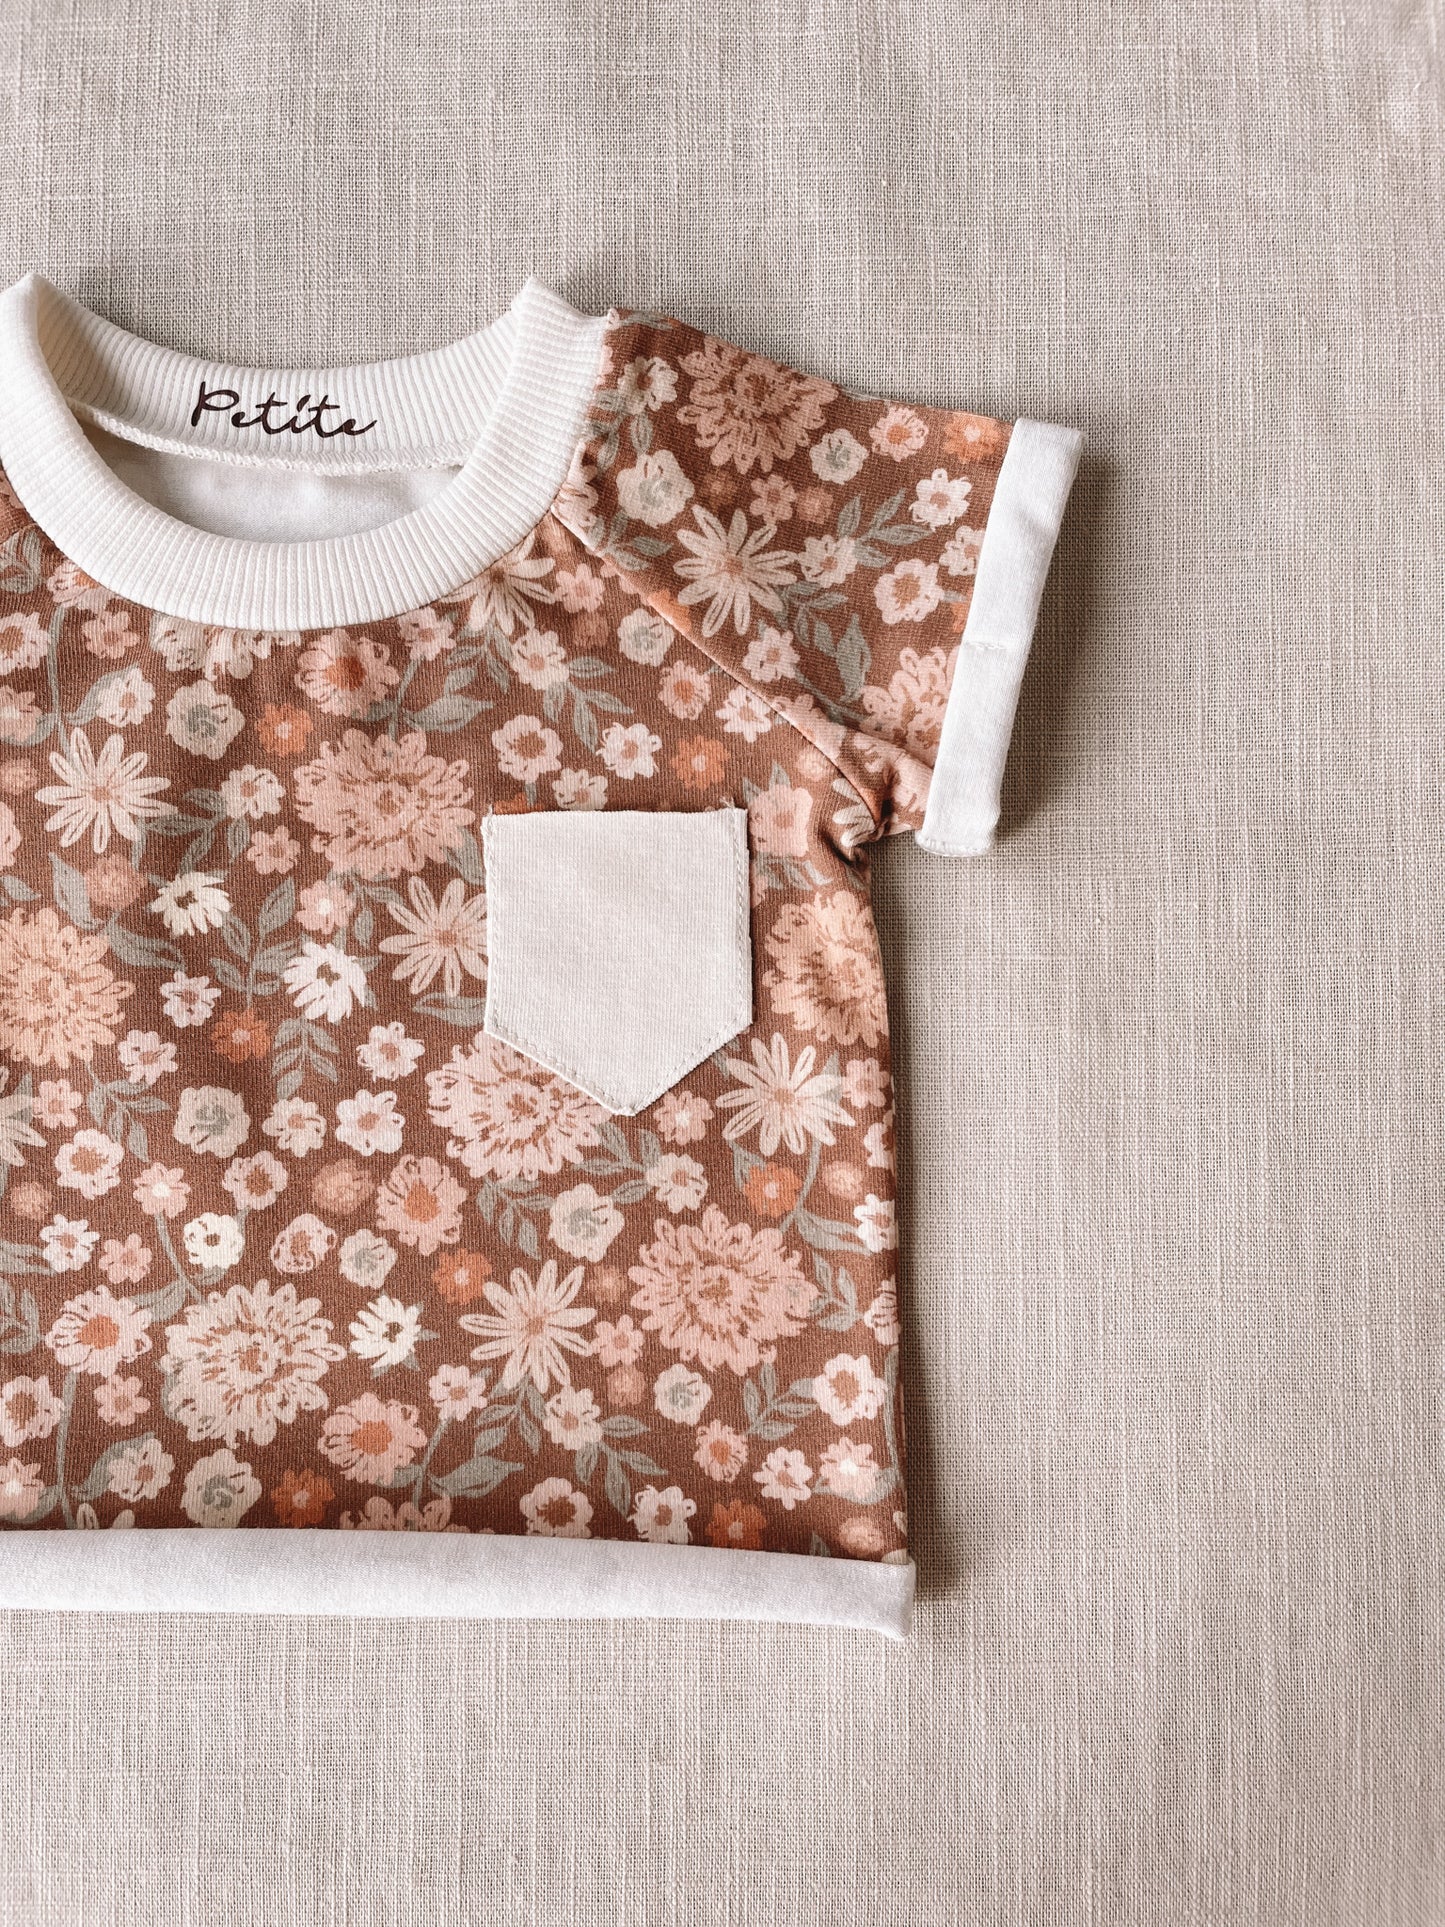 Jersey t-shirt / chocolate floral